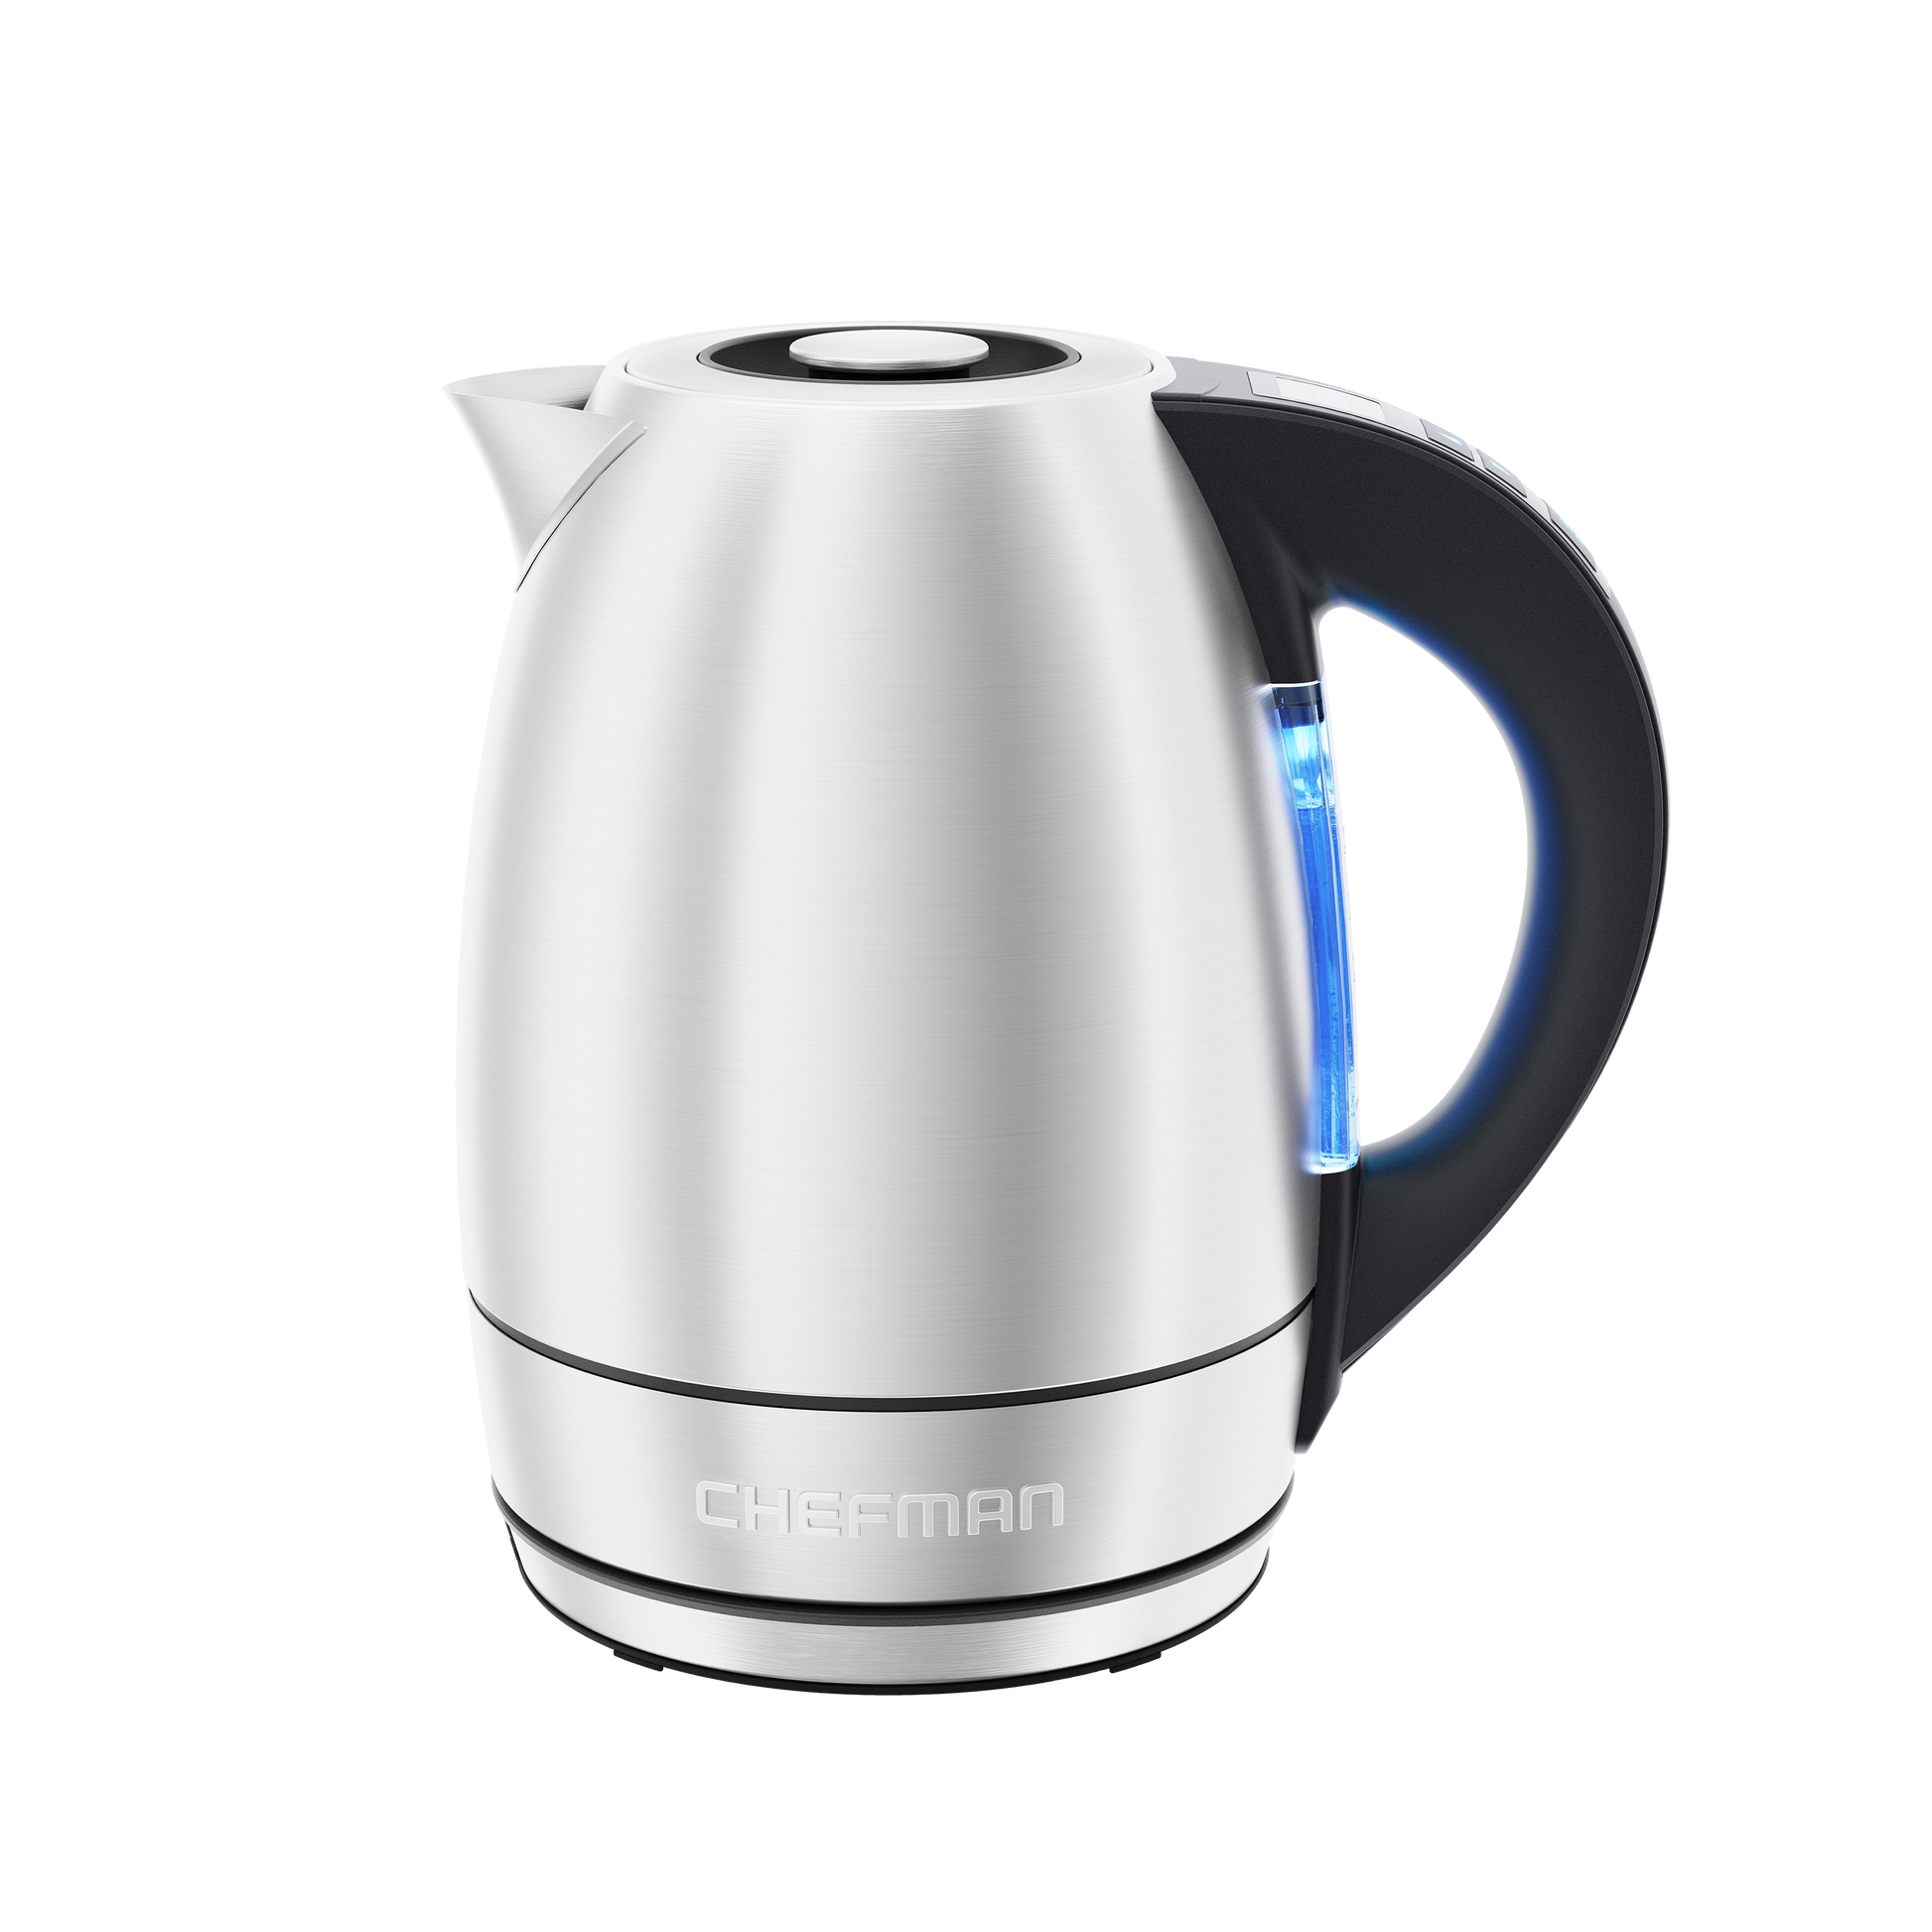 Ochine Electric Kettle Stainless Steel Tea Kettle Coffee Kettle Cordless  Hot Water Boiler Heater 1500W Fast Boil with Led Light, Auto Shut-Off and